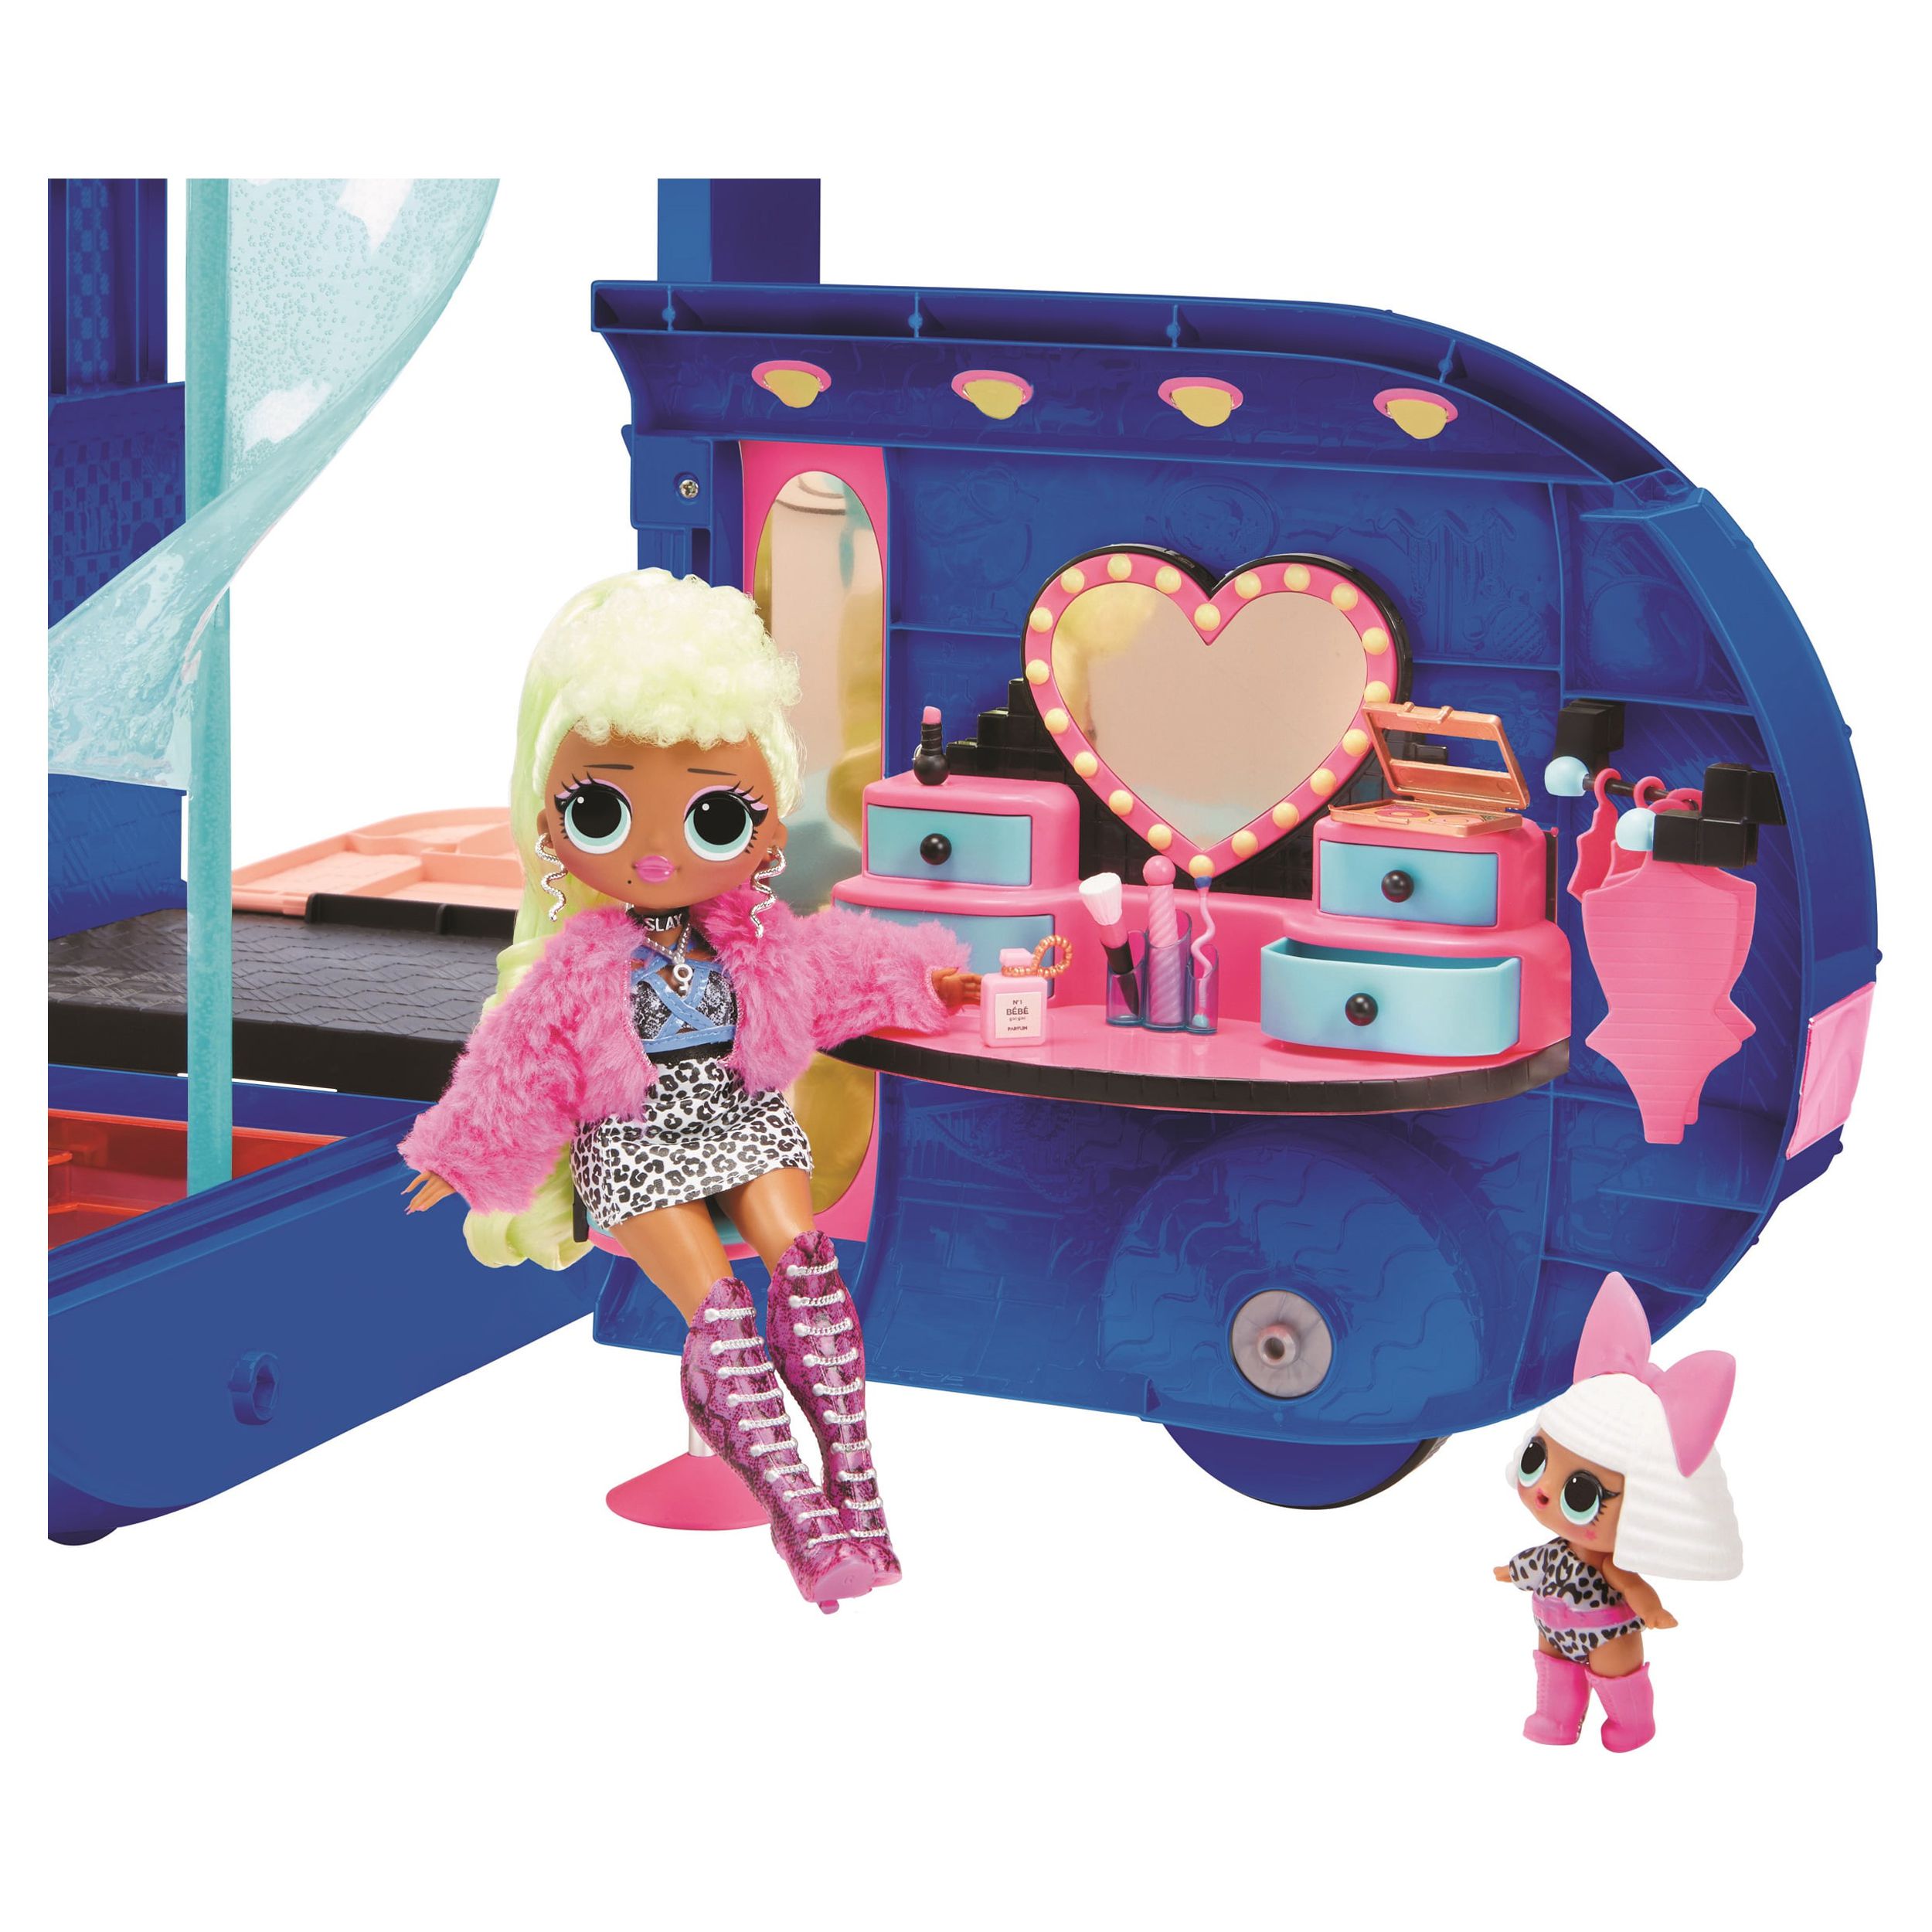 L.O.L. Surprise! O.M.G. 4-in-1 Glamper Fashion Camper with 55+ Surprises (Electric Blue) - image 1 of 4